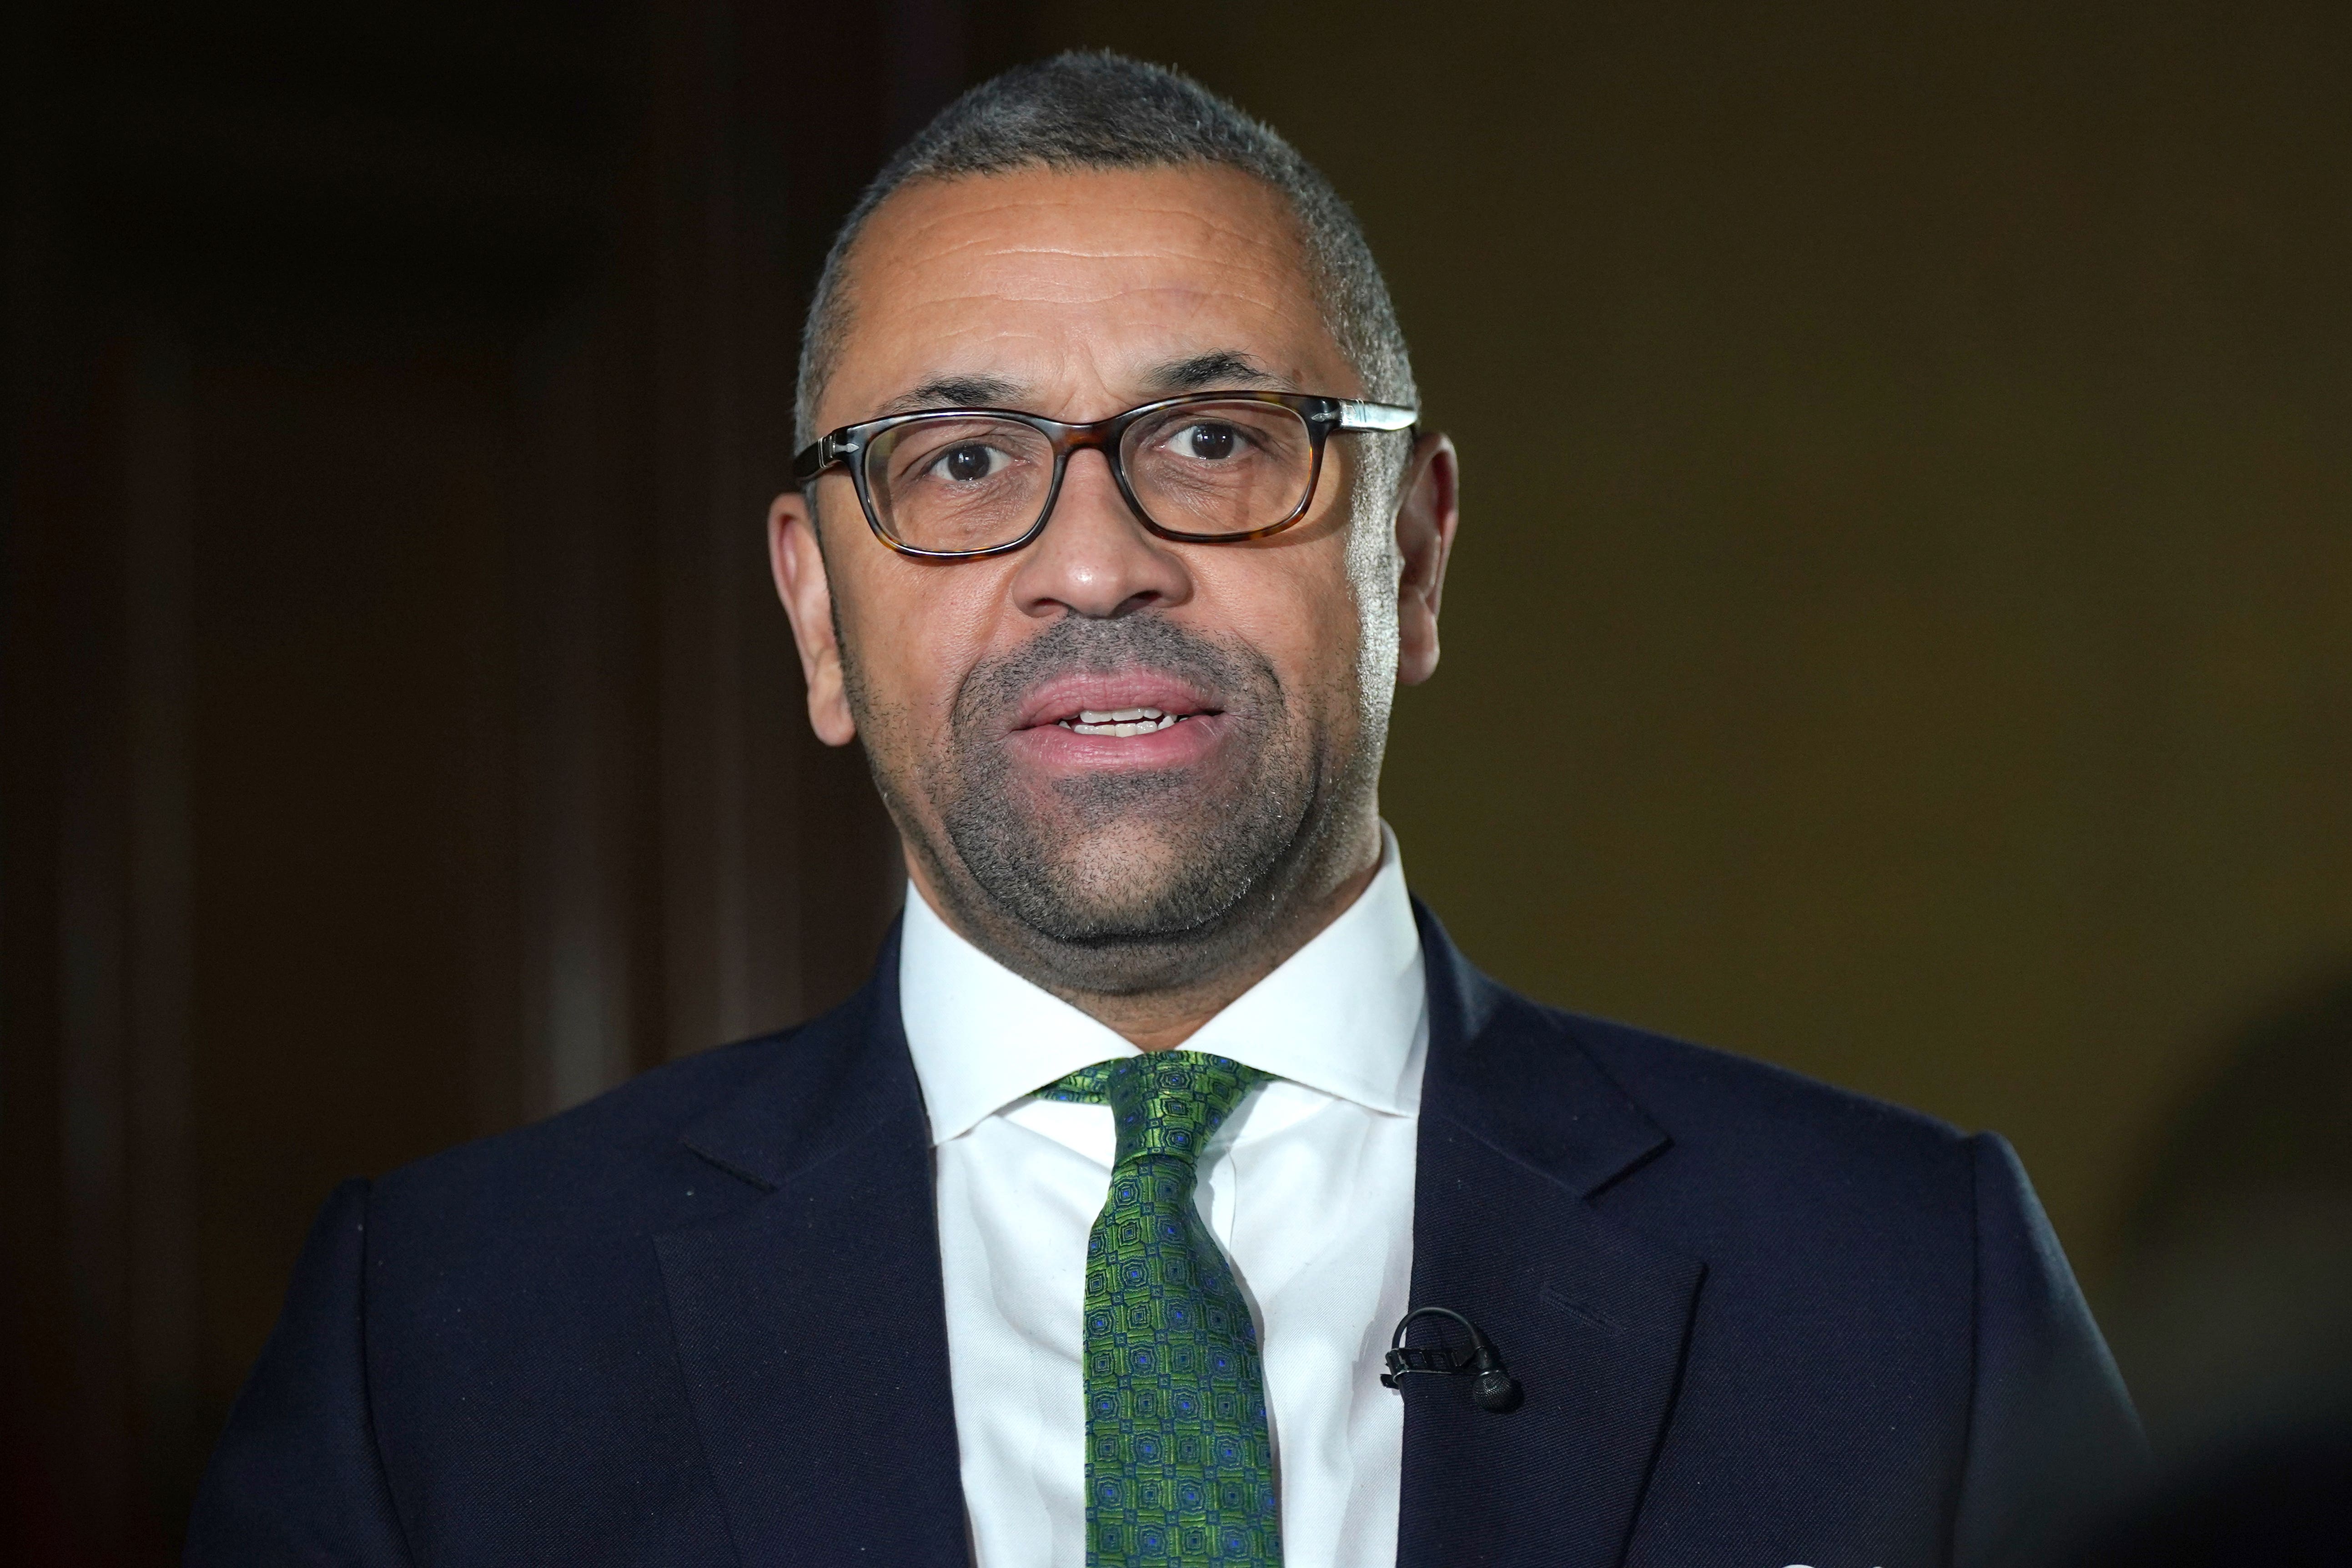 James Cleverly said he expects to meet China’s vice-president when he visits the UK for the King’s coronation (PA)